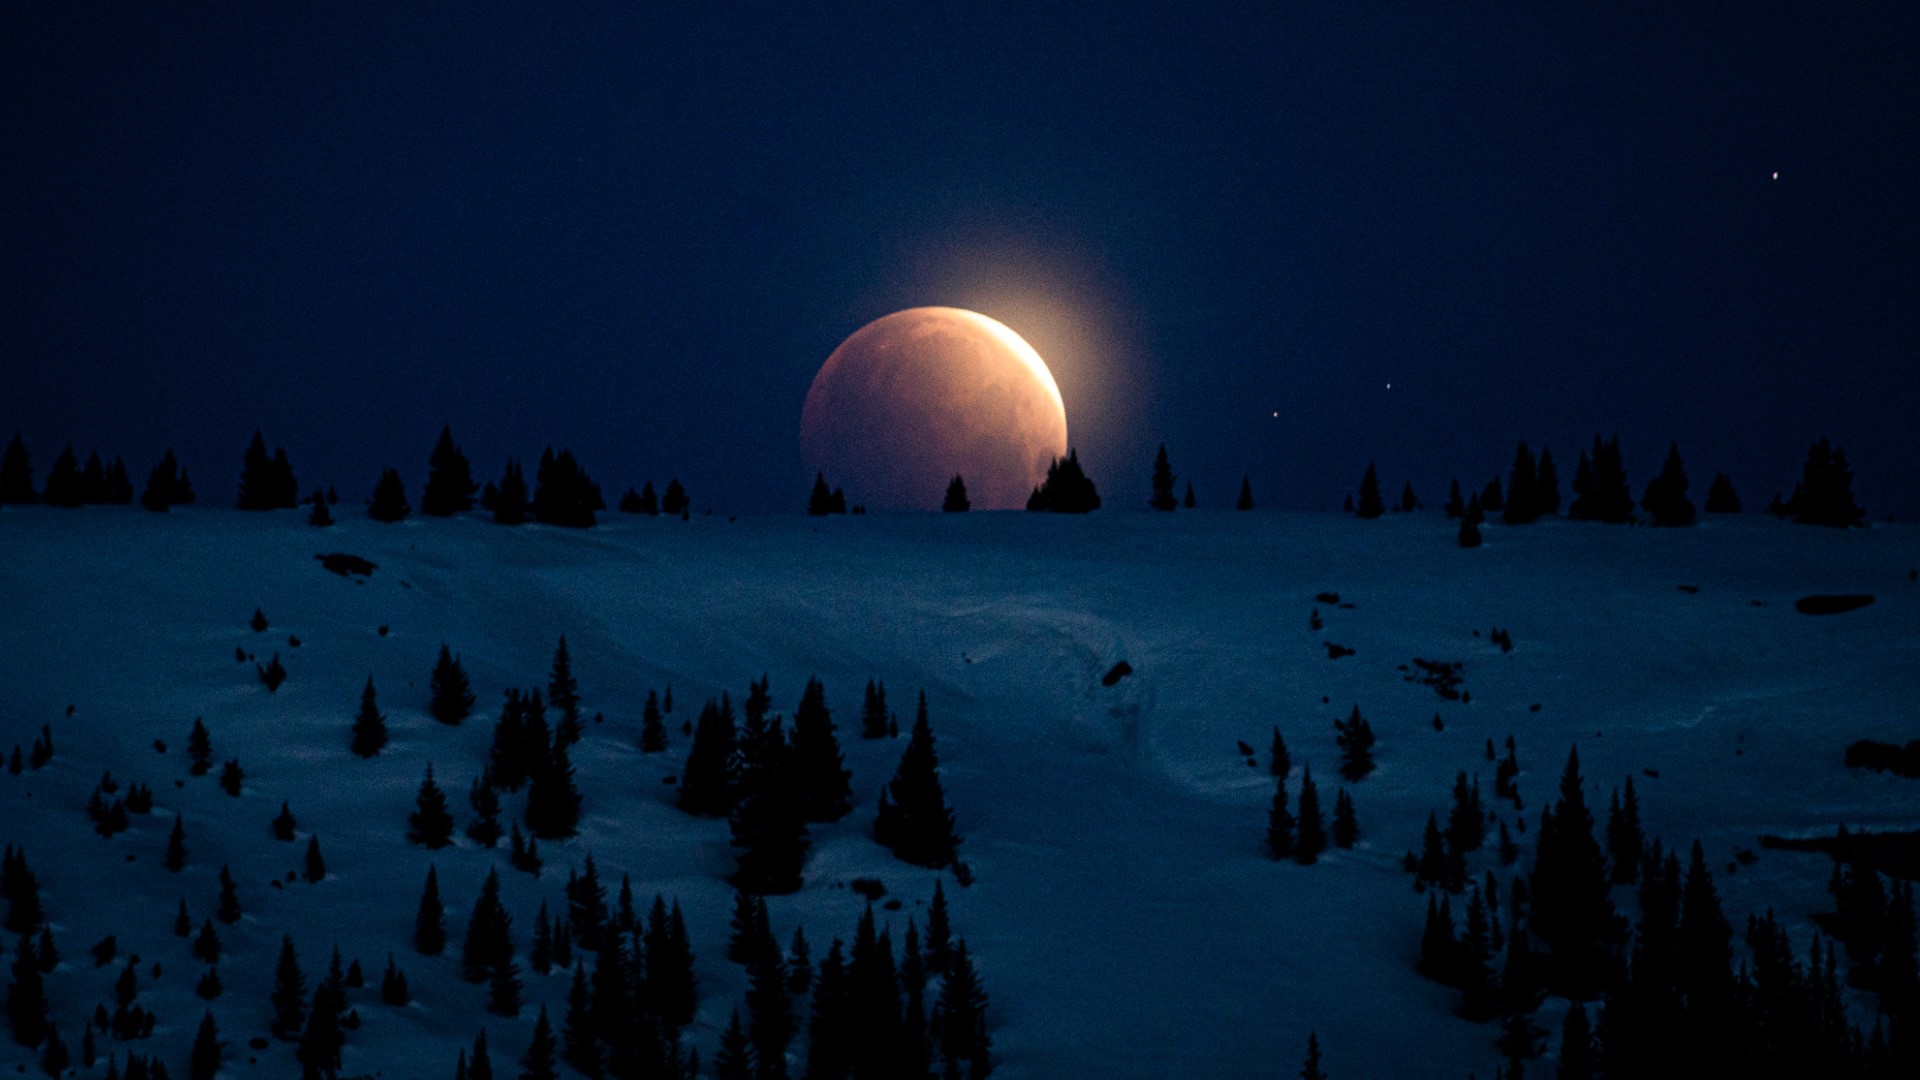 Many in Colorado saw a full lunar eclipse early Wednesday morning